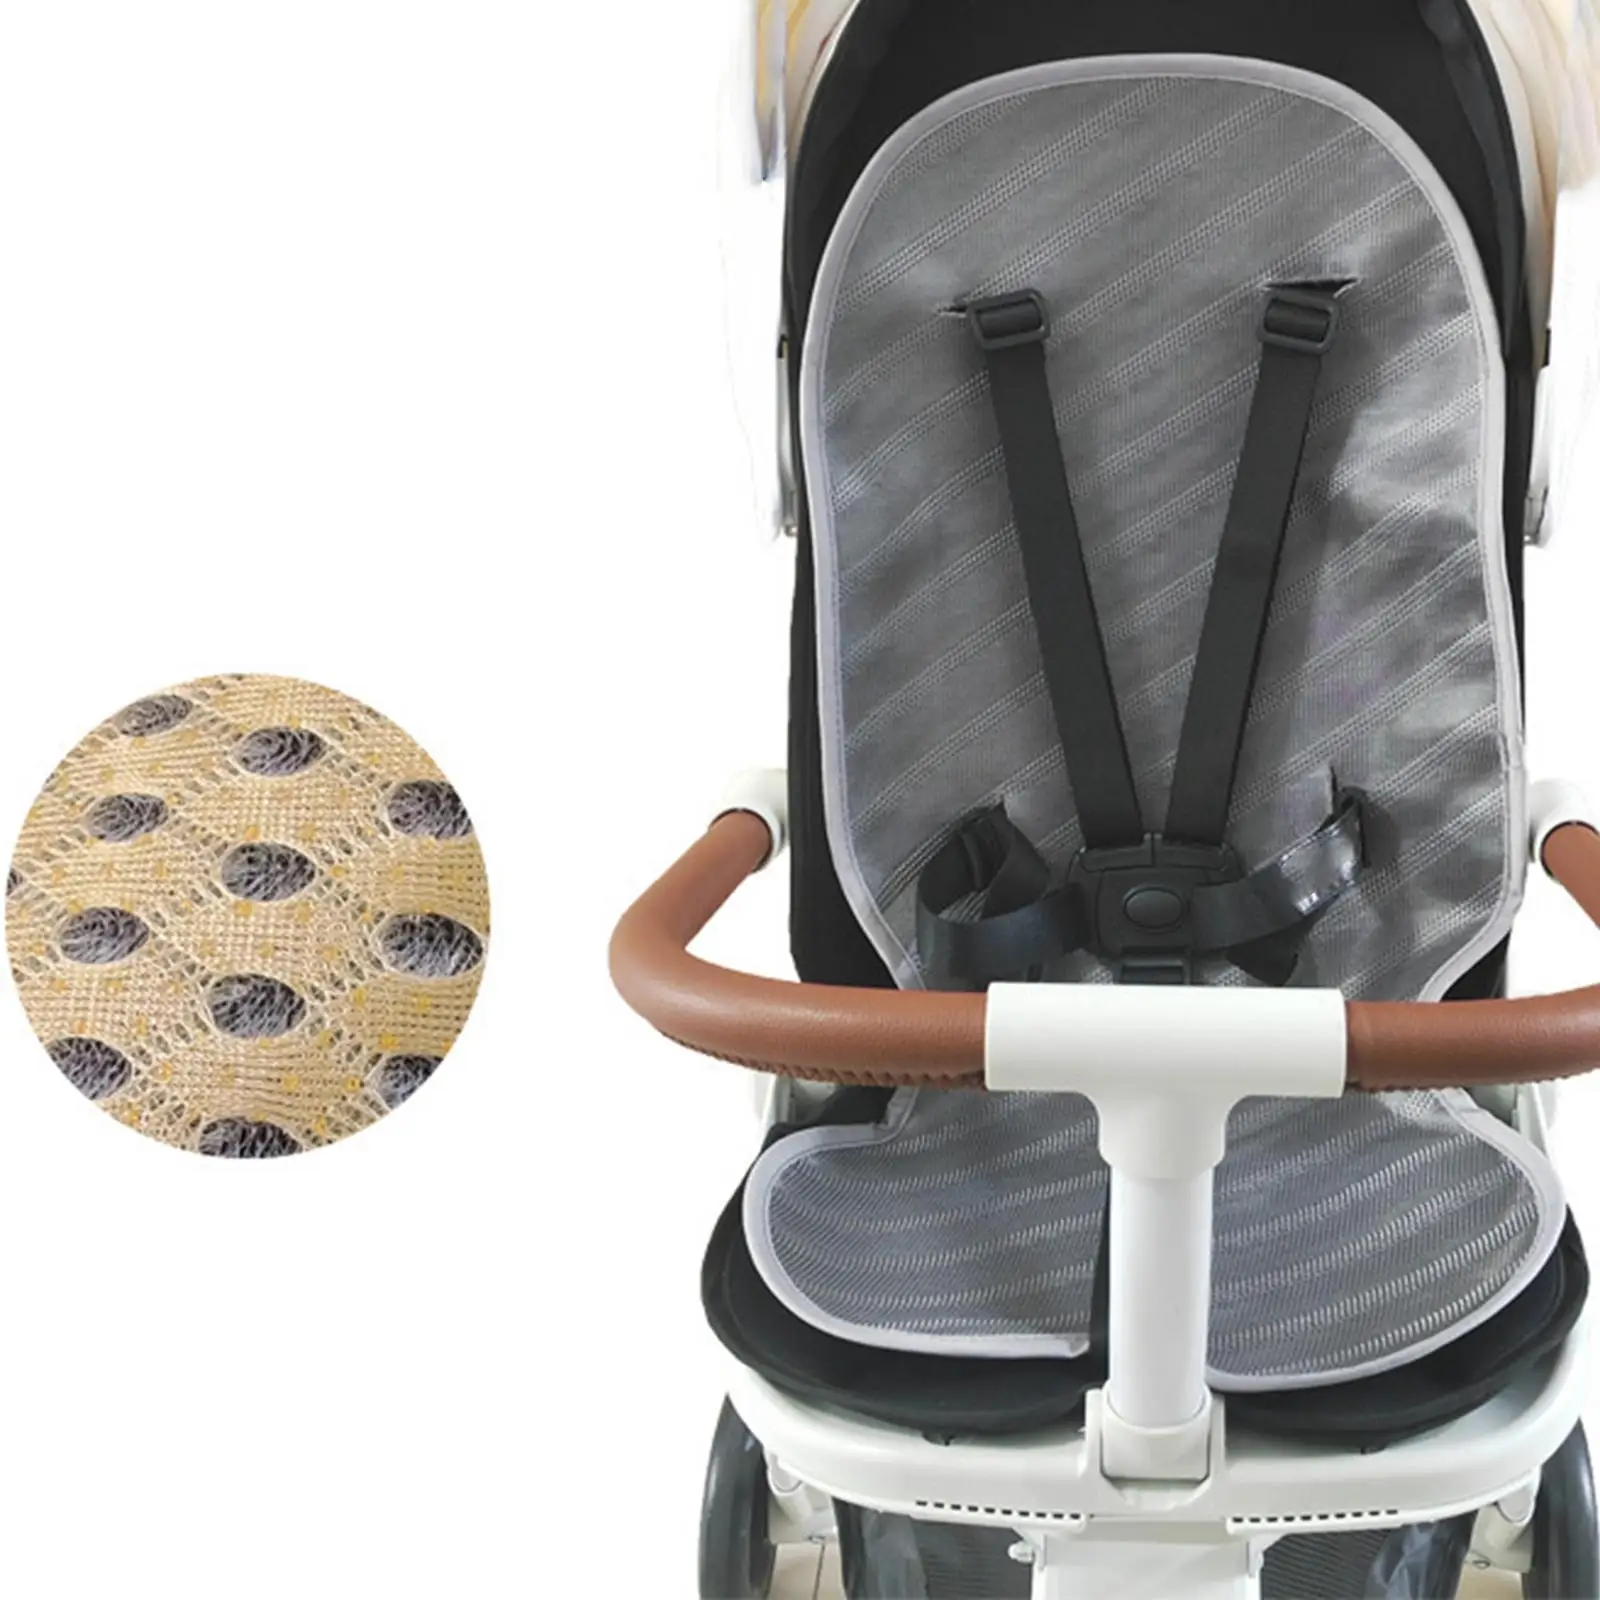 Pushchair Seat Cooling Mat Universal Cool Seat Pad Mat Baby Strollers Cushion Mat for Pram Pushchair Child Safety Seat Trolley